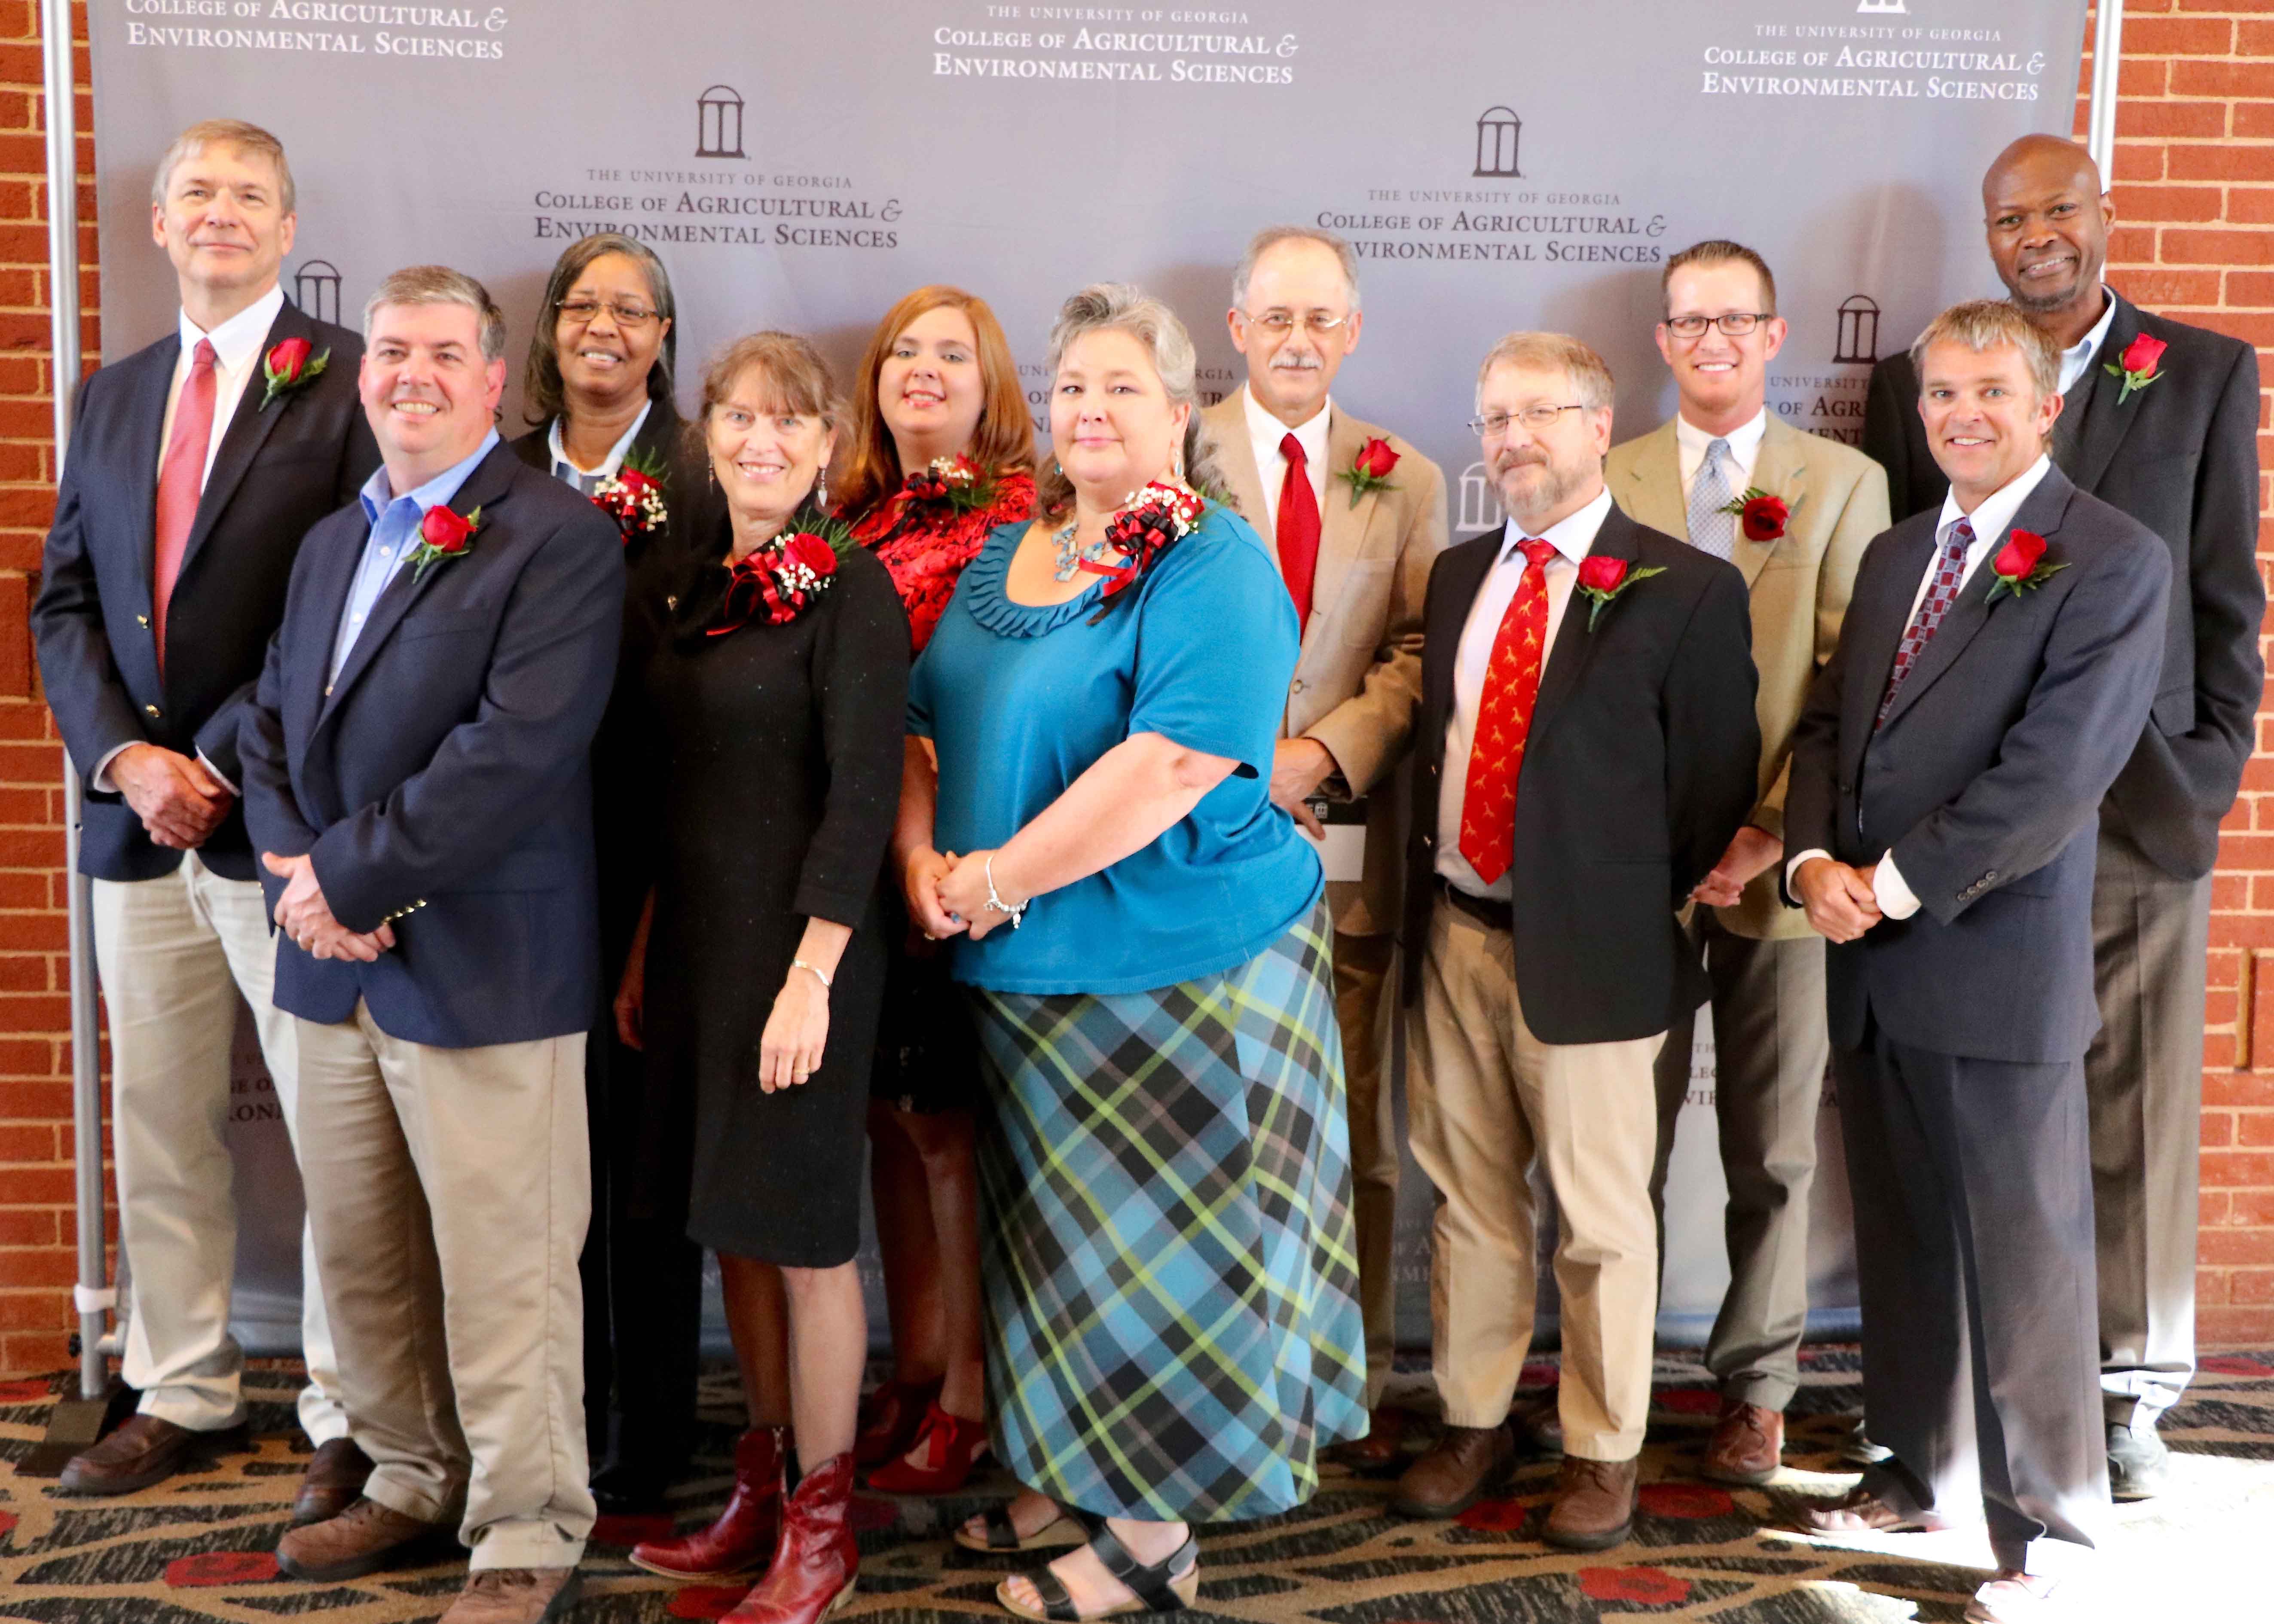 On Nov. 7, 2016 the University of Georgia College of Agriculture and Environmental Sciences honored faculty and staff at the D.W. Brooks Lecture and Awards Ceremony. Those honored included; from left front row; Brian Fairchild, Julia Gaskin, JoAnne Norris, Wayne Parrott, Bill Tyson; and from left back row; Peter LaFayette, Carla Barnett, Lindsey Barner, Tim Brenneman, Nick Fuhrman and Ron Walcott.